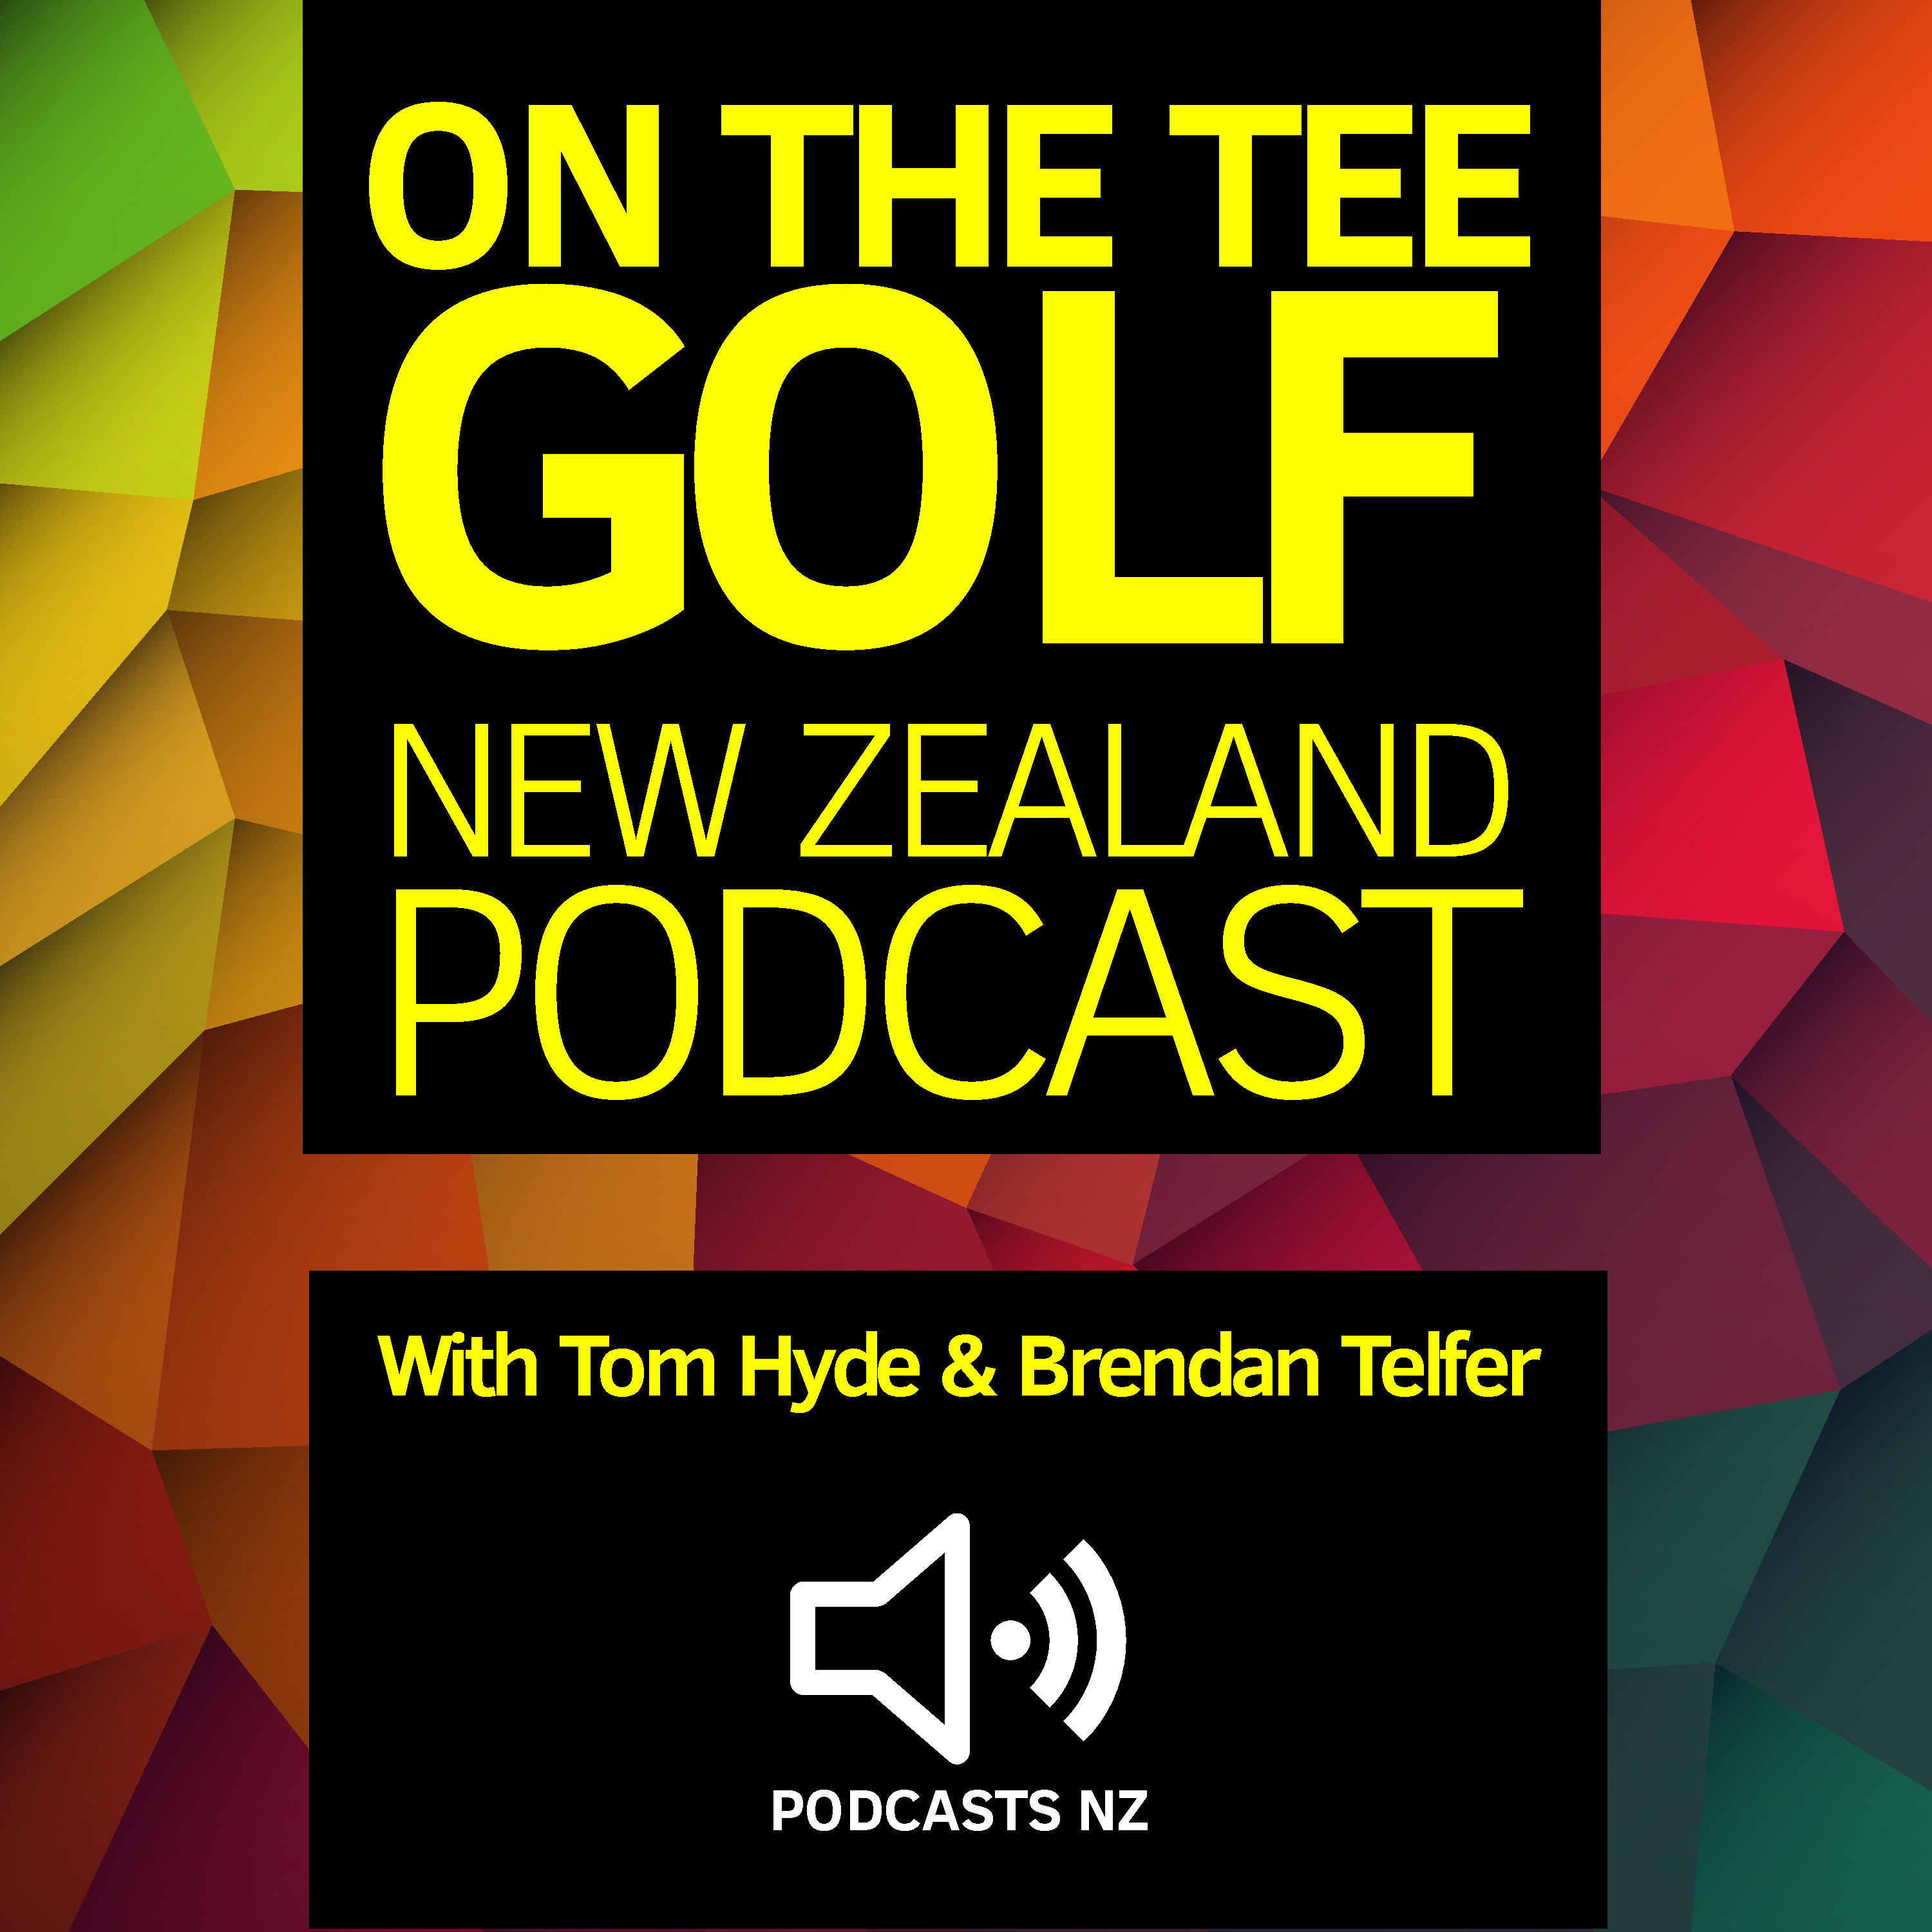 On The Tee Golf New Zealand Podcast